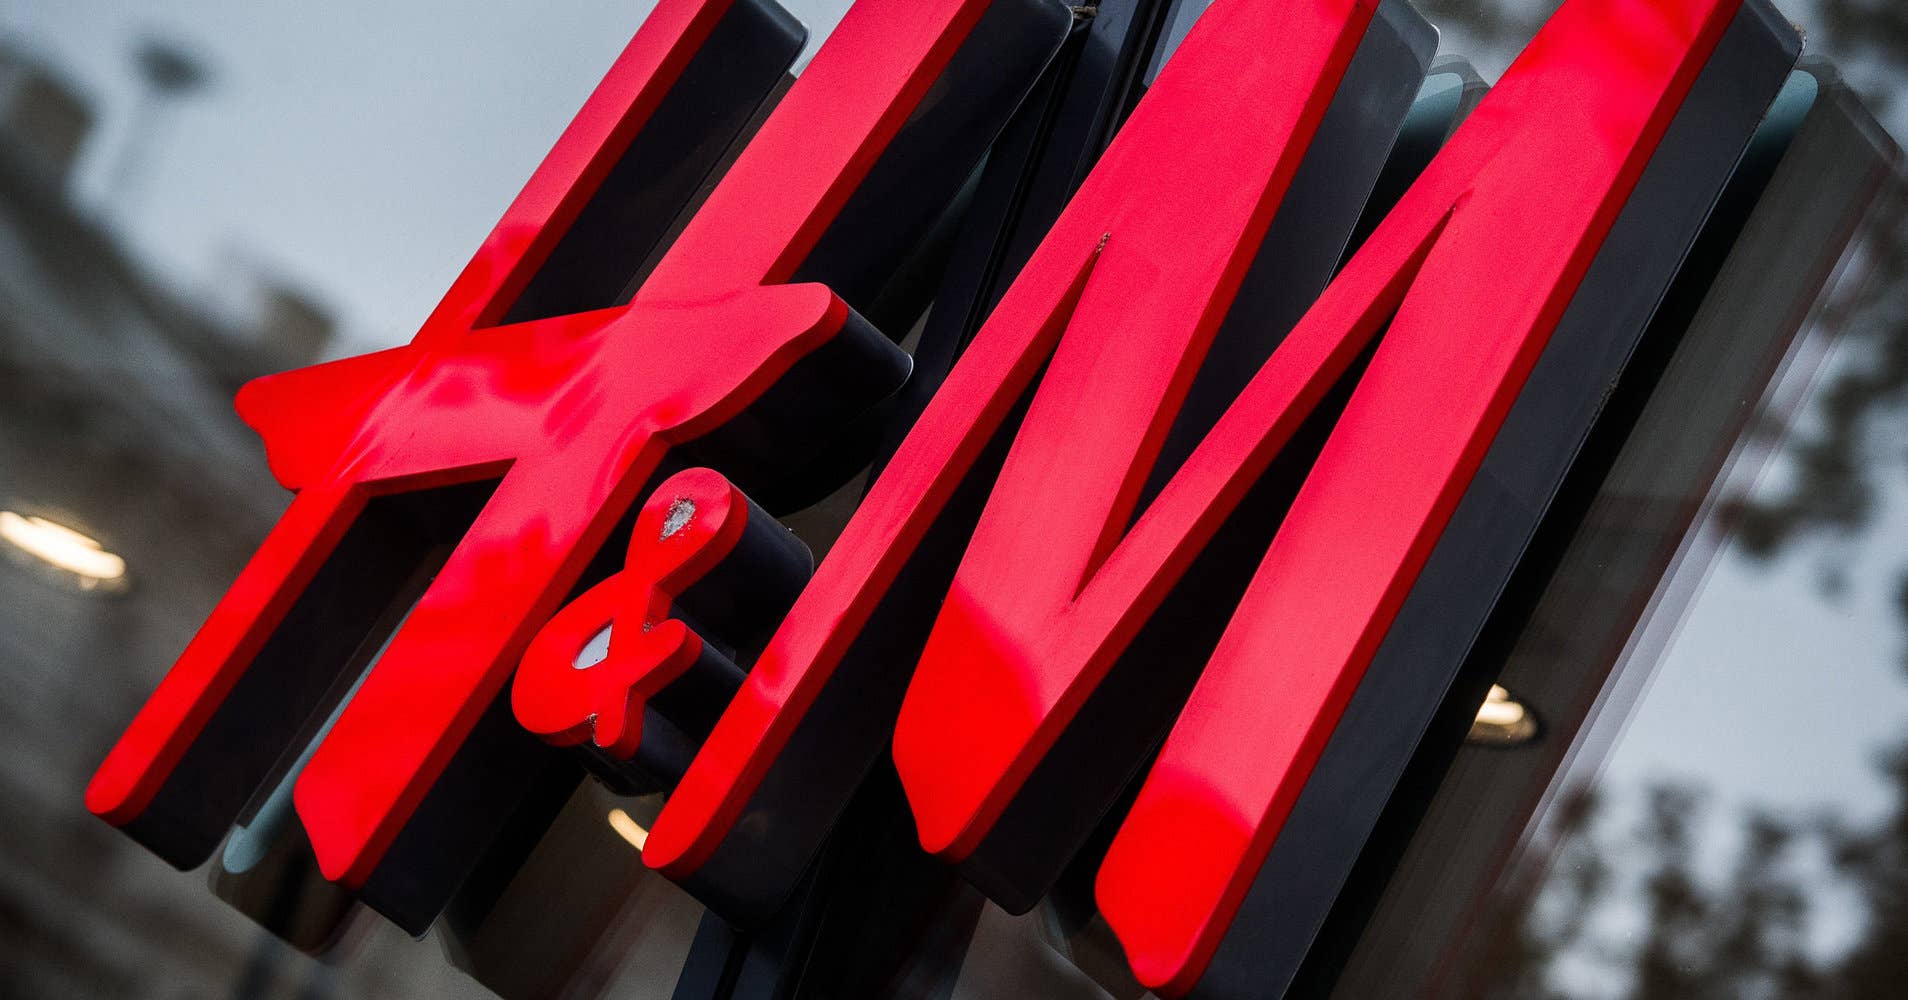 H&M Finally Launches Online Shopping In Canada